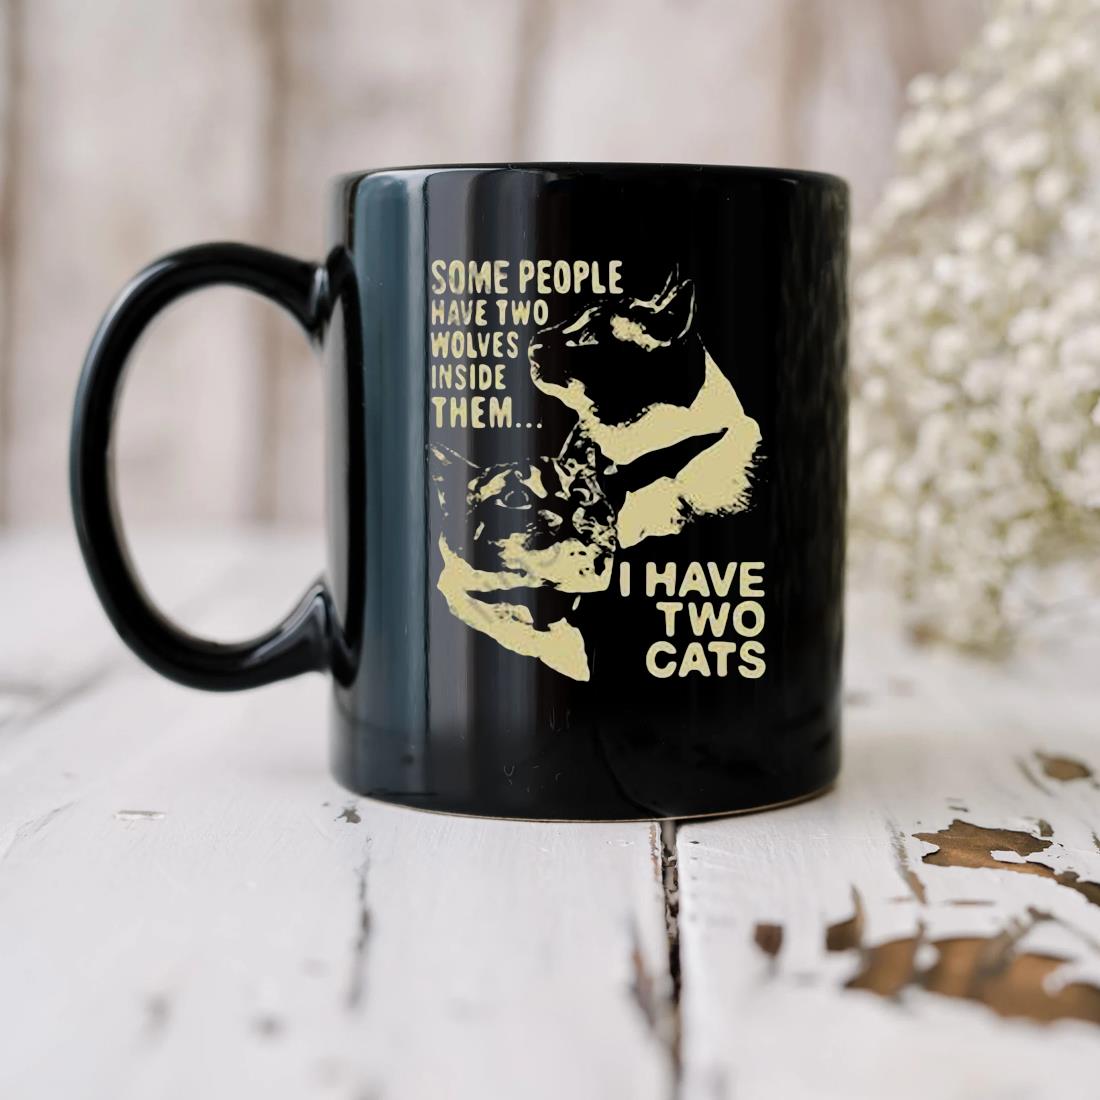 Ome People Have Two Wolves Inside Them I Have Two Cats Mug biu